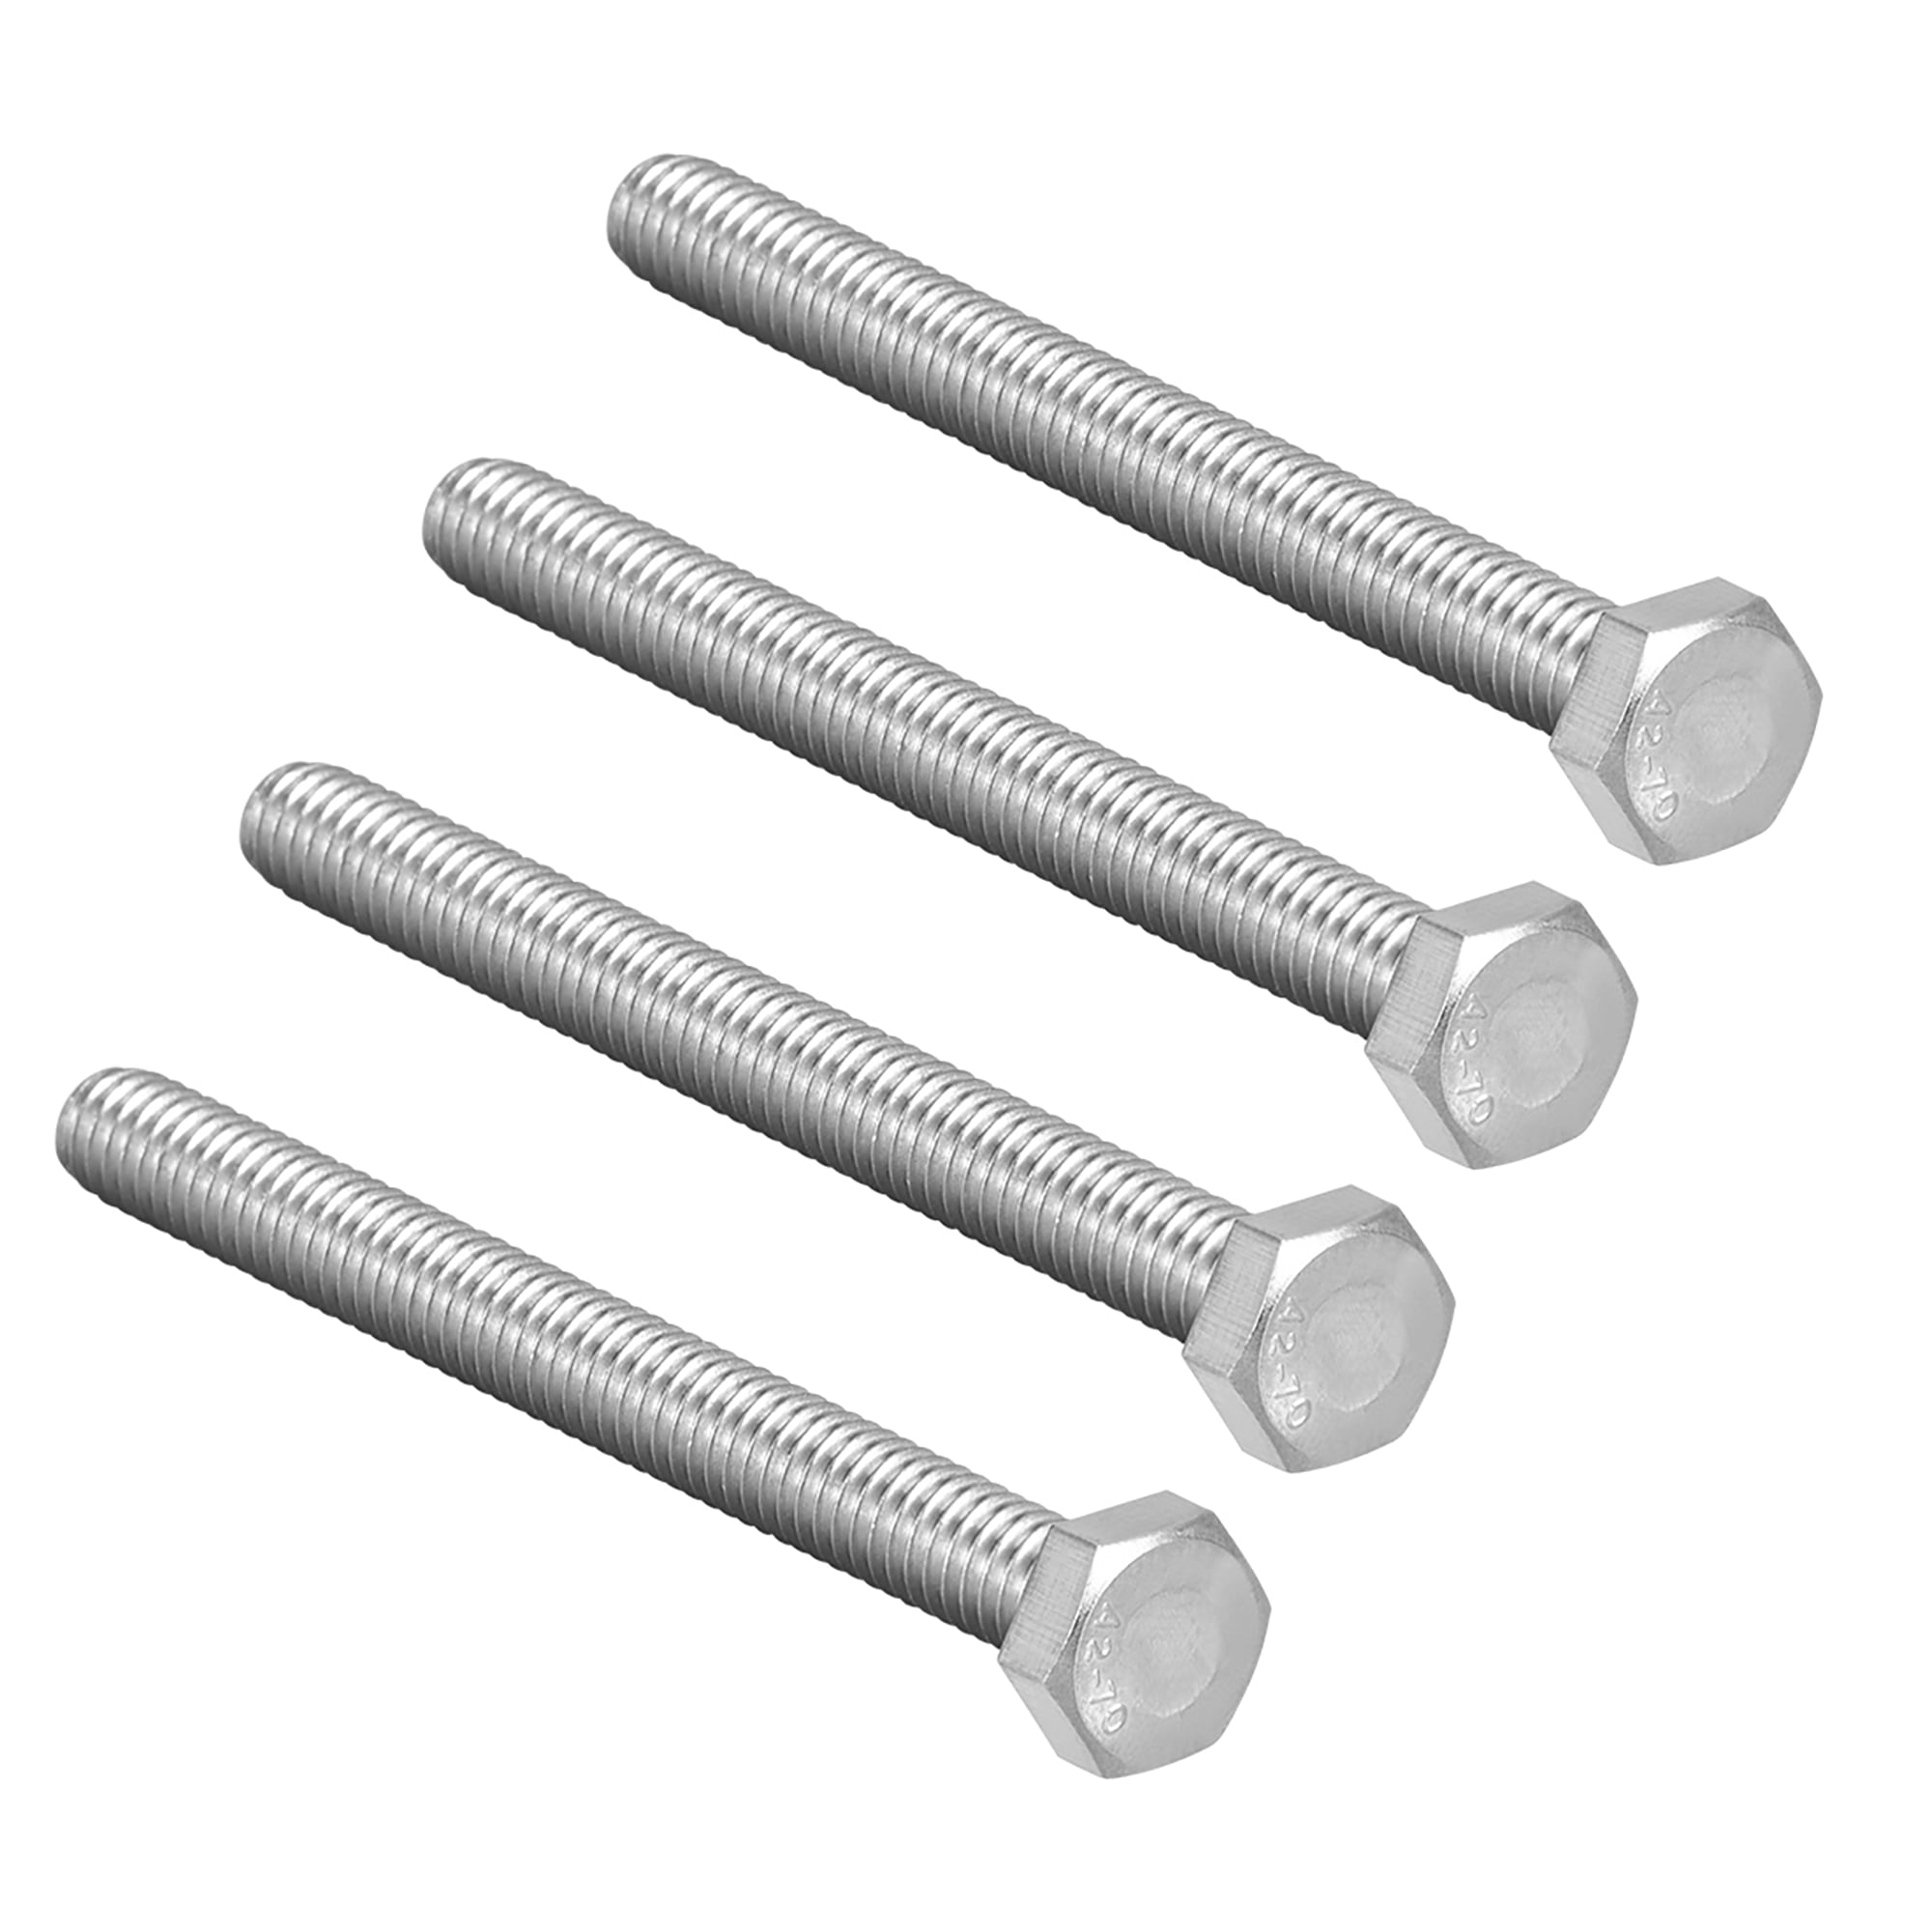 8mm Qty 5 Hex Bolt M8 x 150mm Stainless Steel SS 304 A2 70 Set Screw 